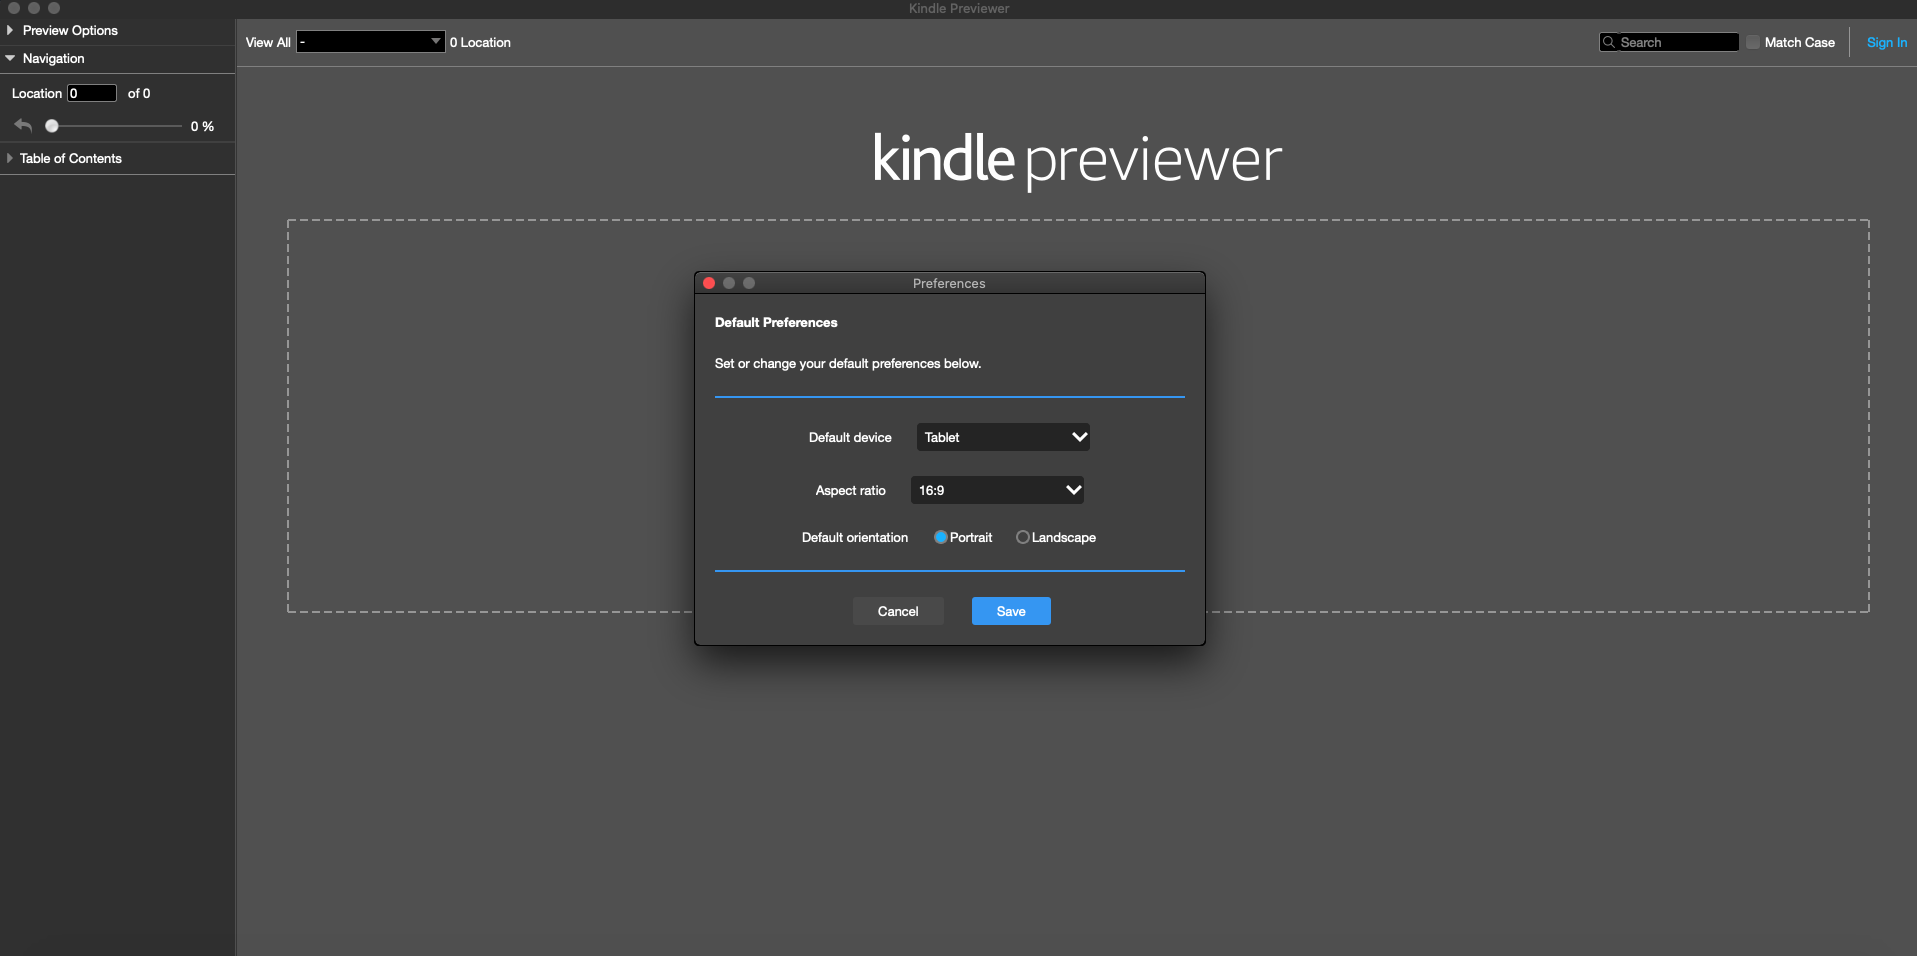 Kindle Previewer 3.5 : Preferences window